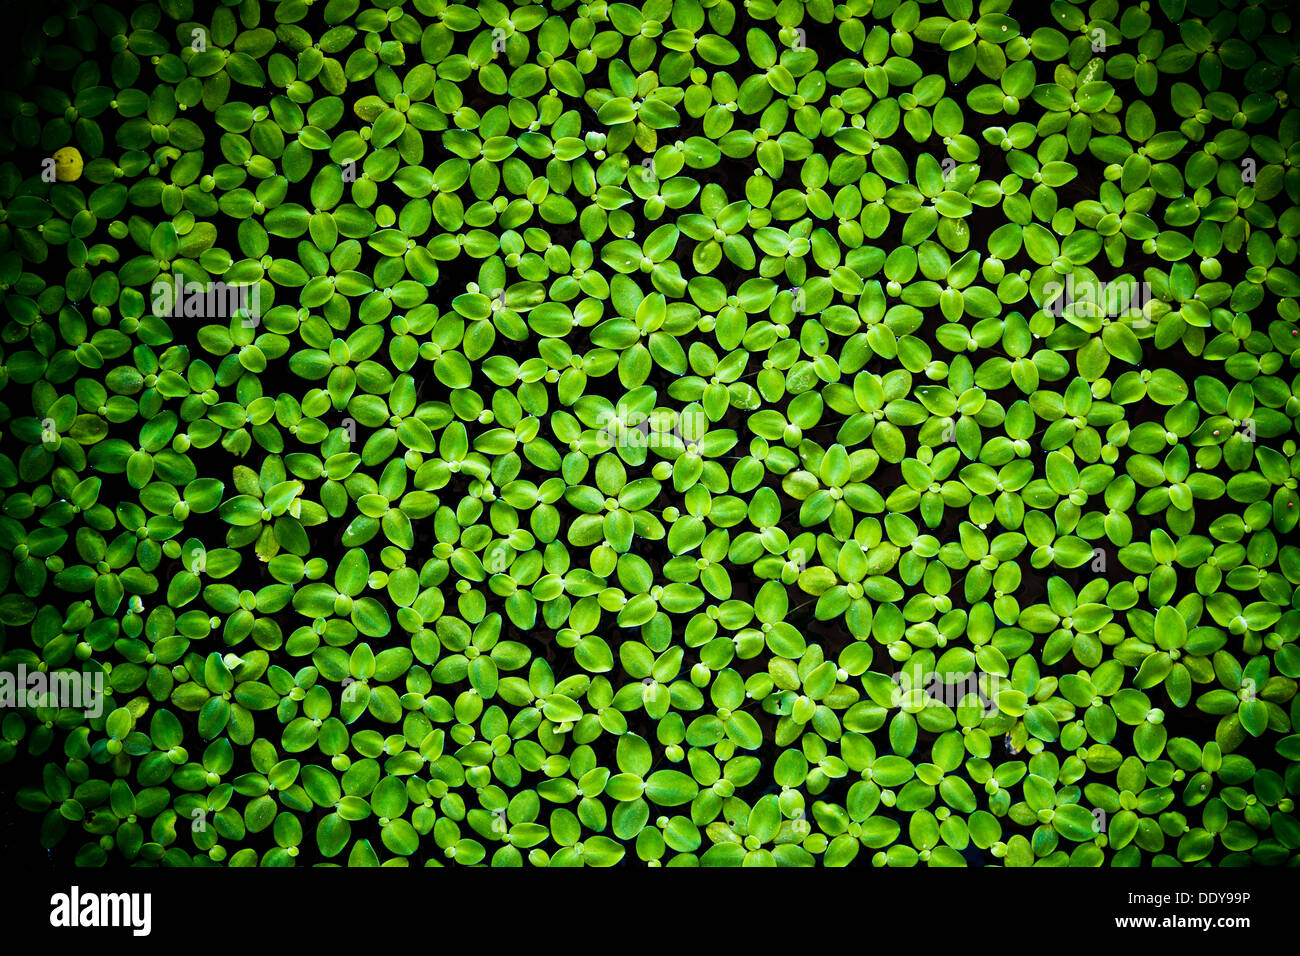 garden, background, surface, outdoor, closeup, wet, decoration, aquatic, dirty, natural, park, mud, green, duckweed,weed,swamp Stock Photo